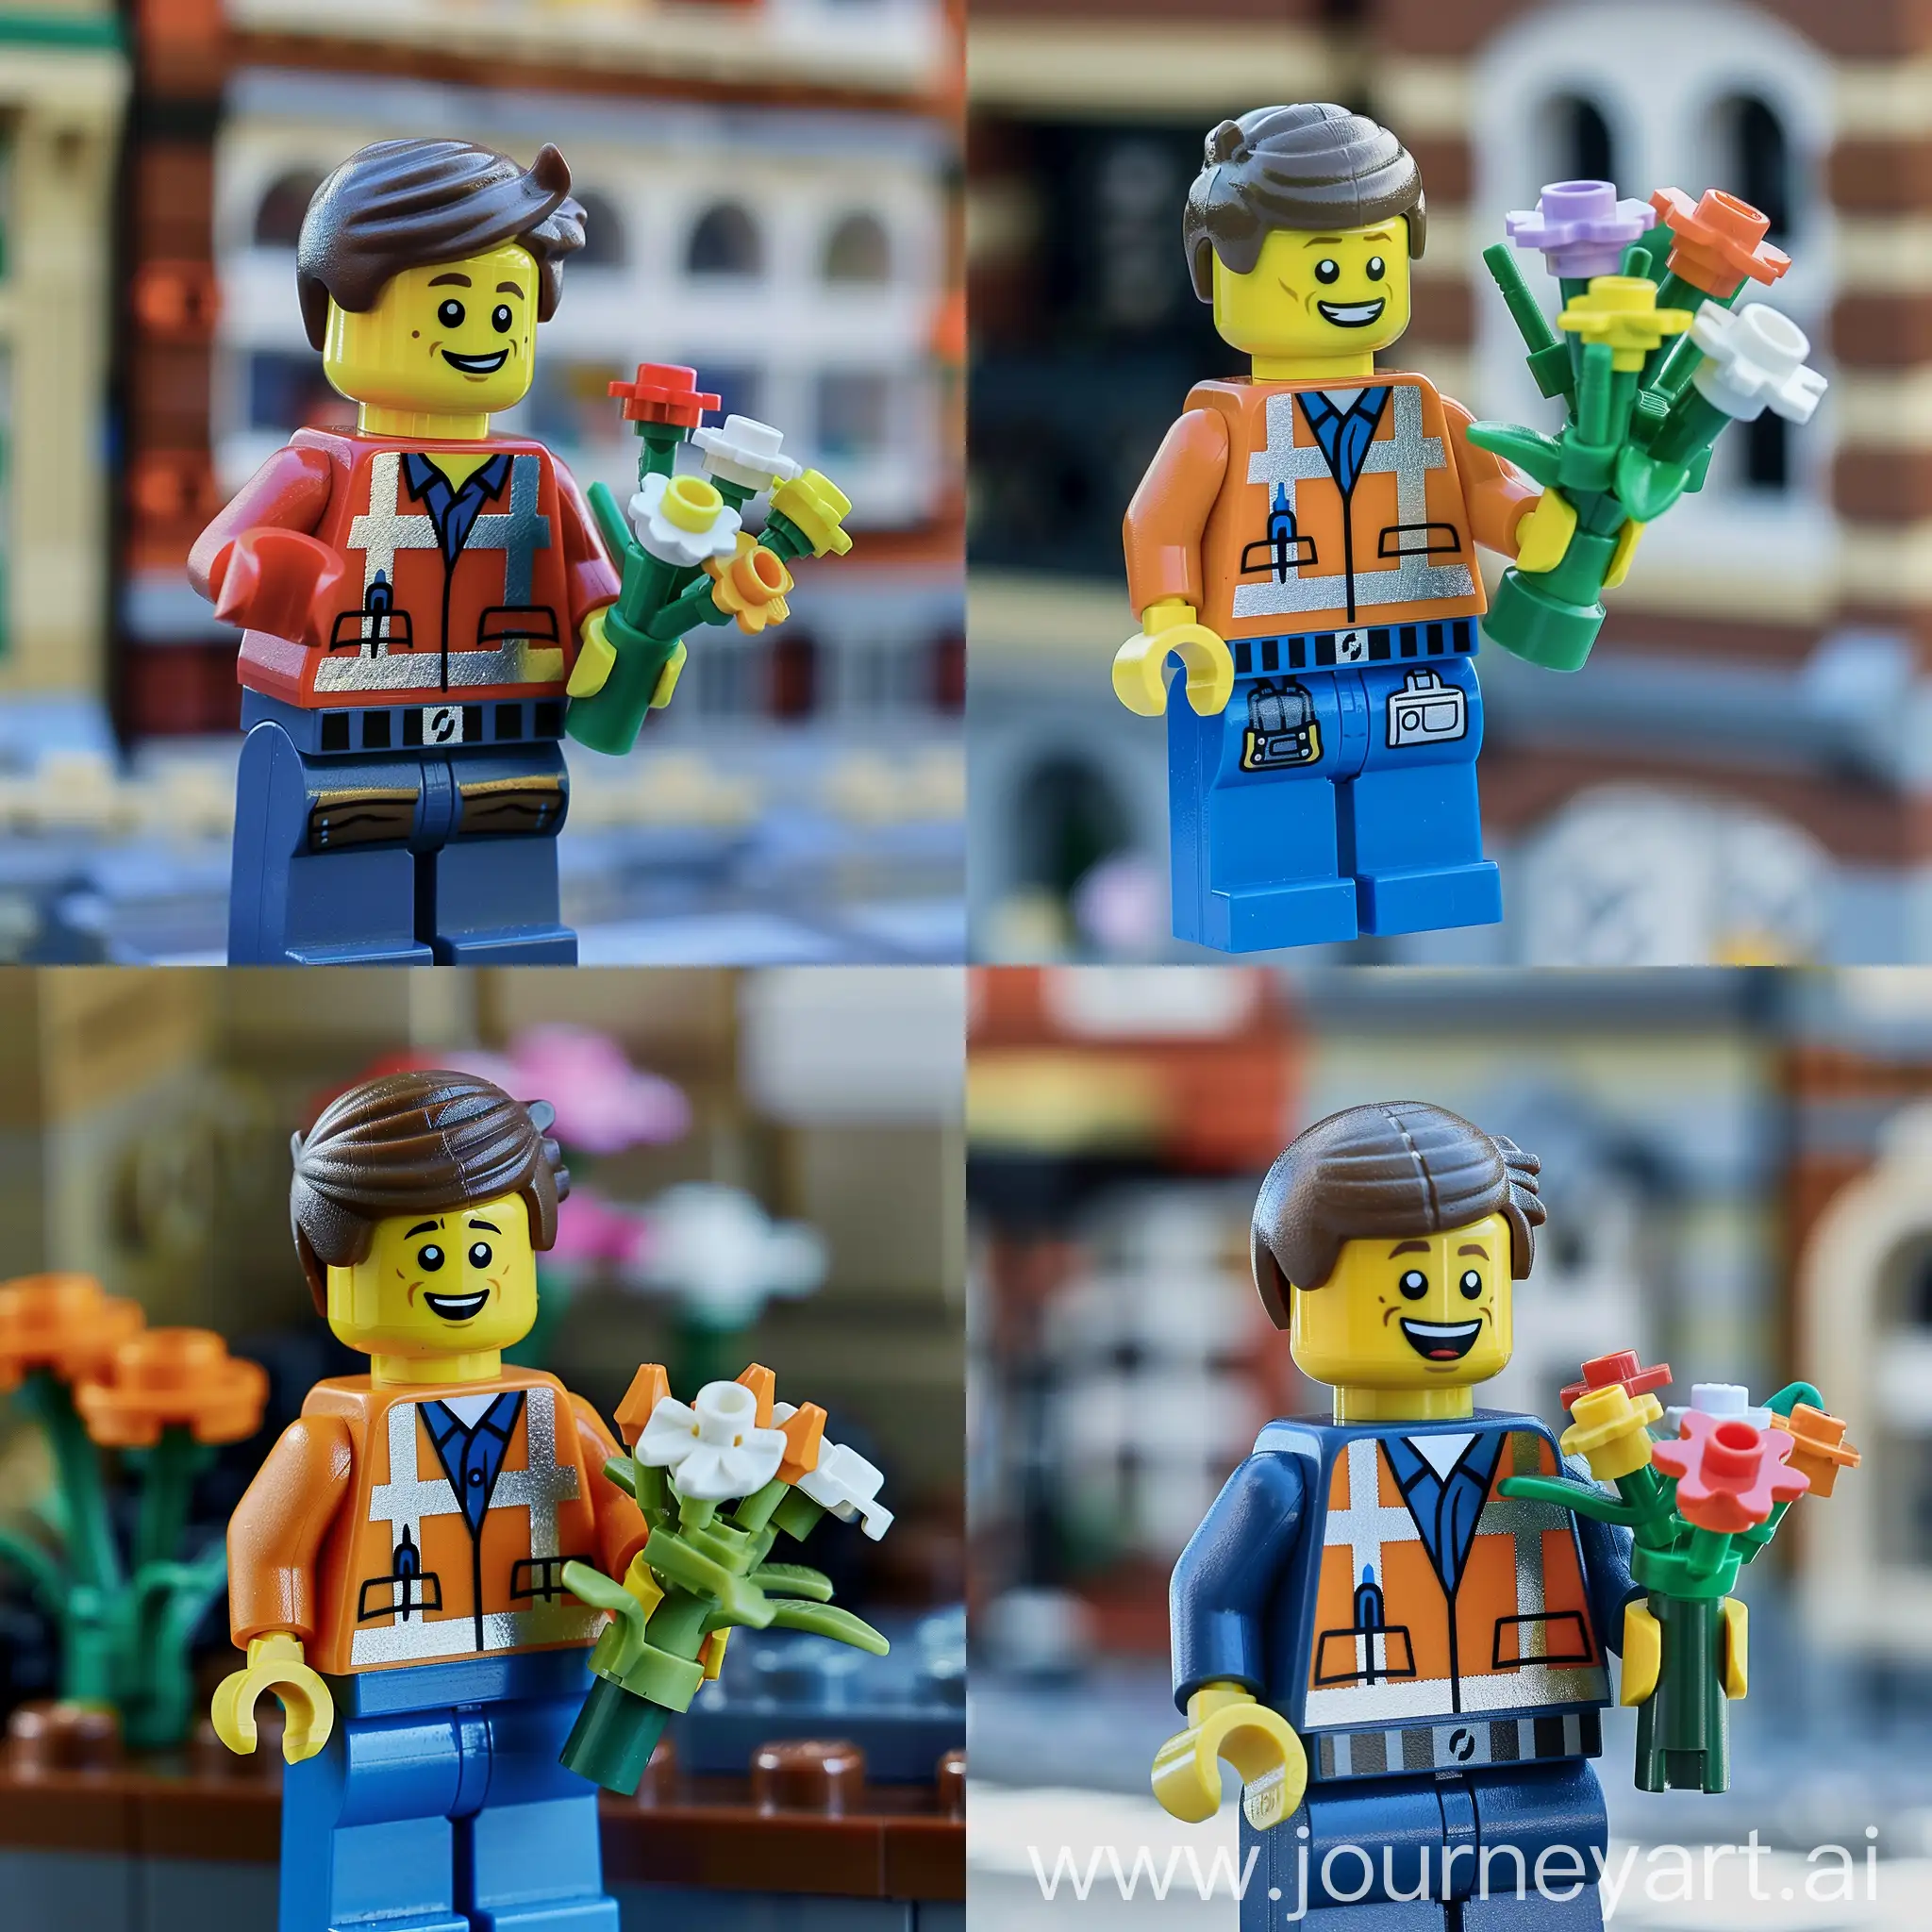 Lego-Man-Holding-Flowers-Colorful-Toy-Figure-with-Bouquet